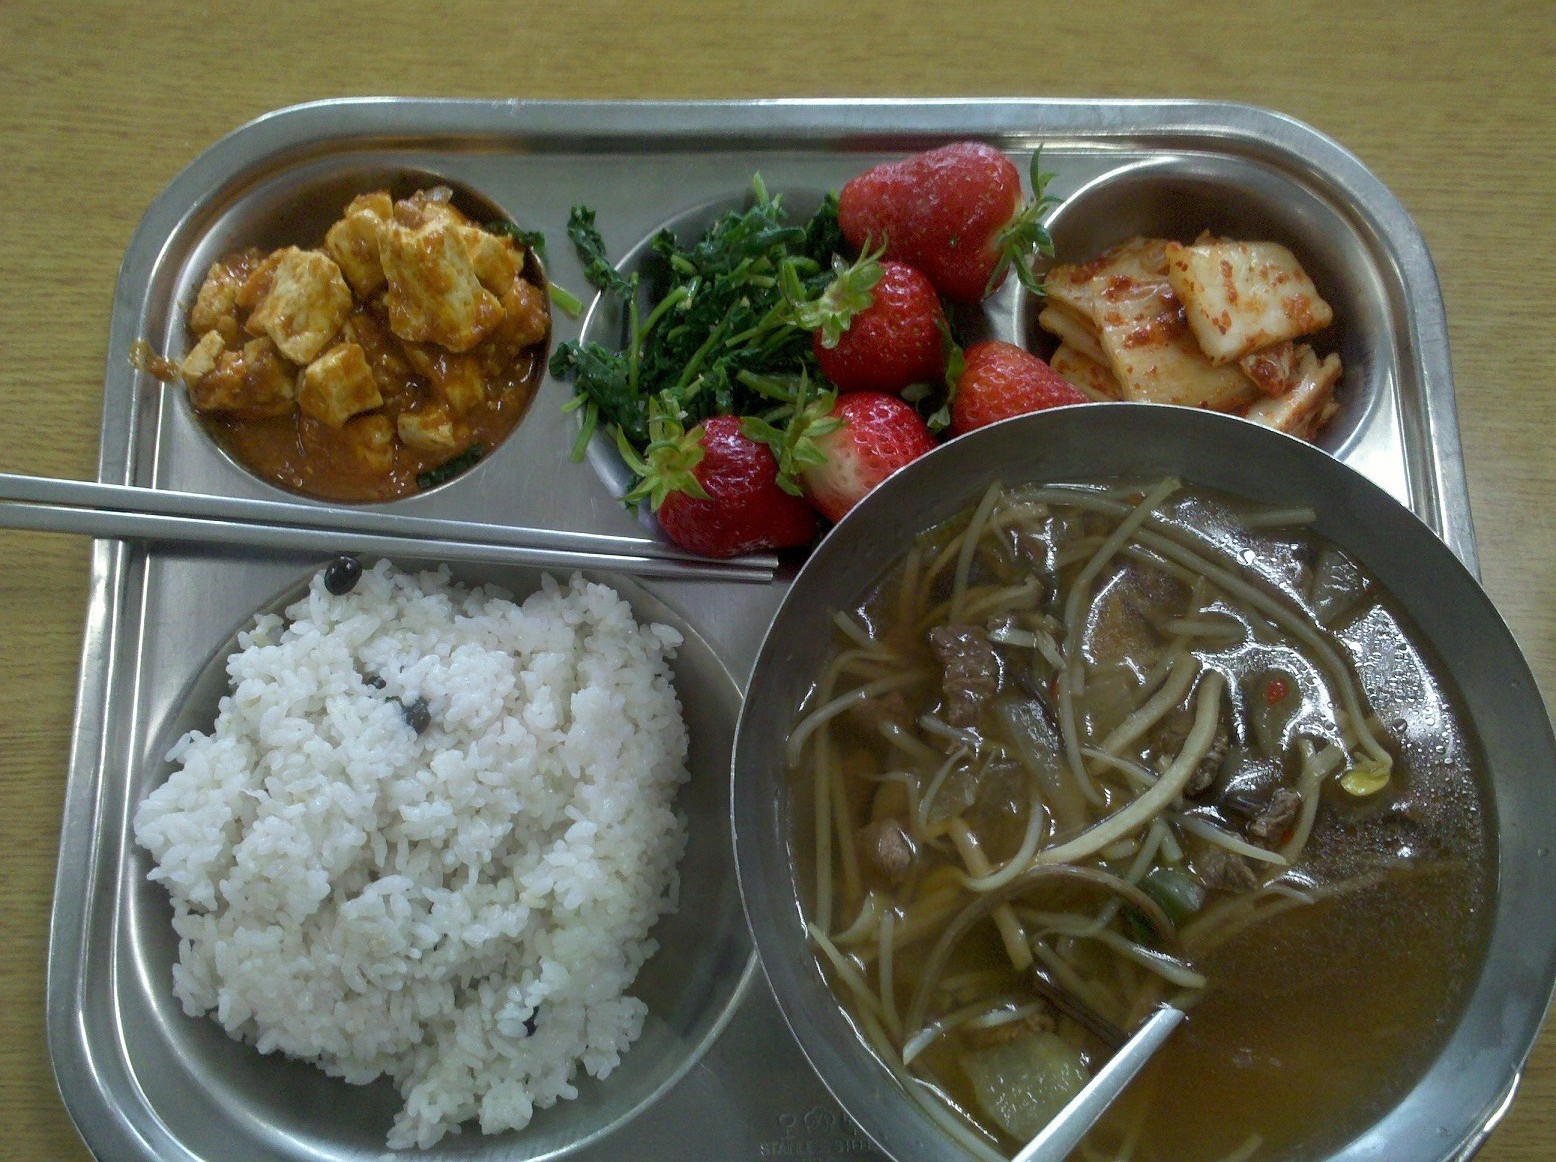 Korean Middle School Lunch- Left to right top down- fresh tofu in sauce, parboiled spinach and garlic in sesame oil, farm fresh strawberries, on-site fermented kimchi, mixed black beans and rice, beef soybean sprout soup with assorted vegetables.